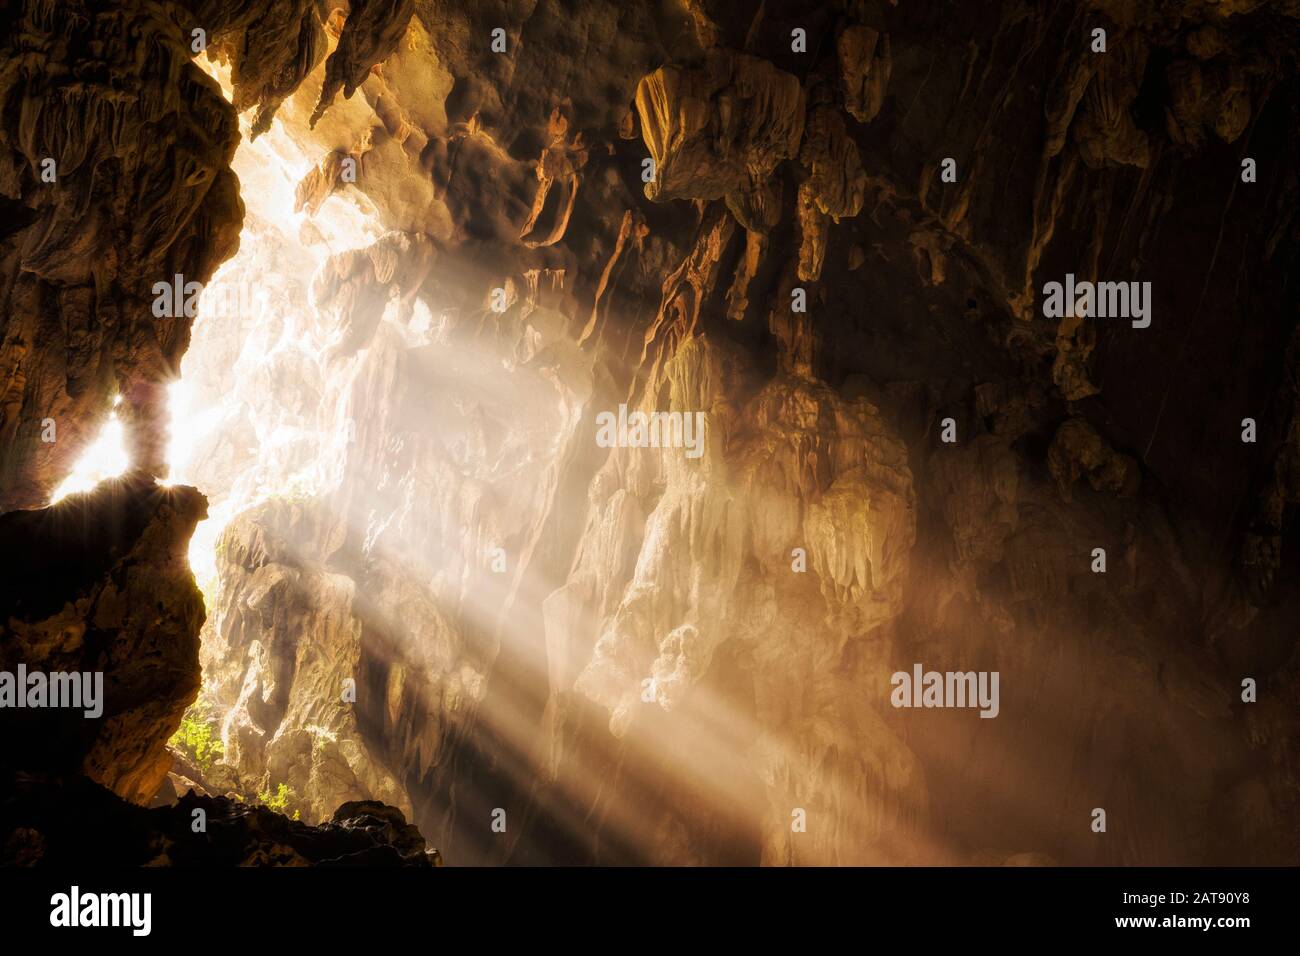 Light shinning through cave opening at Tham Phu Kham Cave in Vang Vieng, Vientiane Province, Laos. Stock Photo